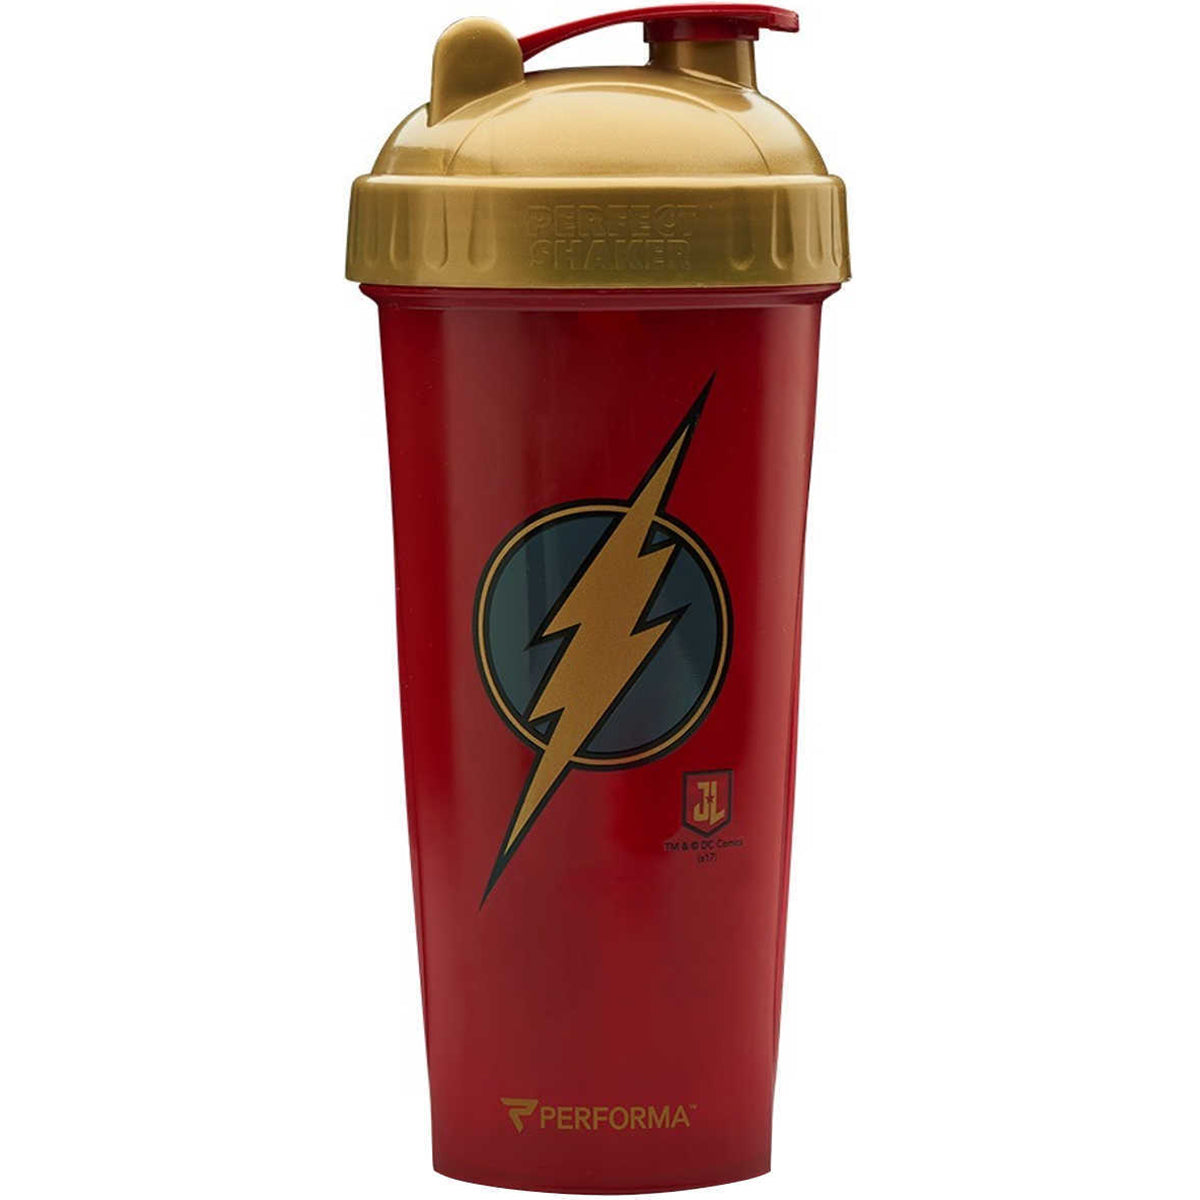 Performa PerfectShaker 28 oz. Justice League Shaker Cup Bottle - The Flash PerfectShaker